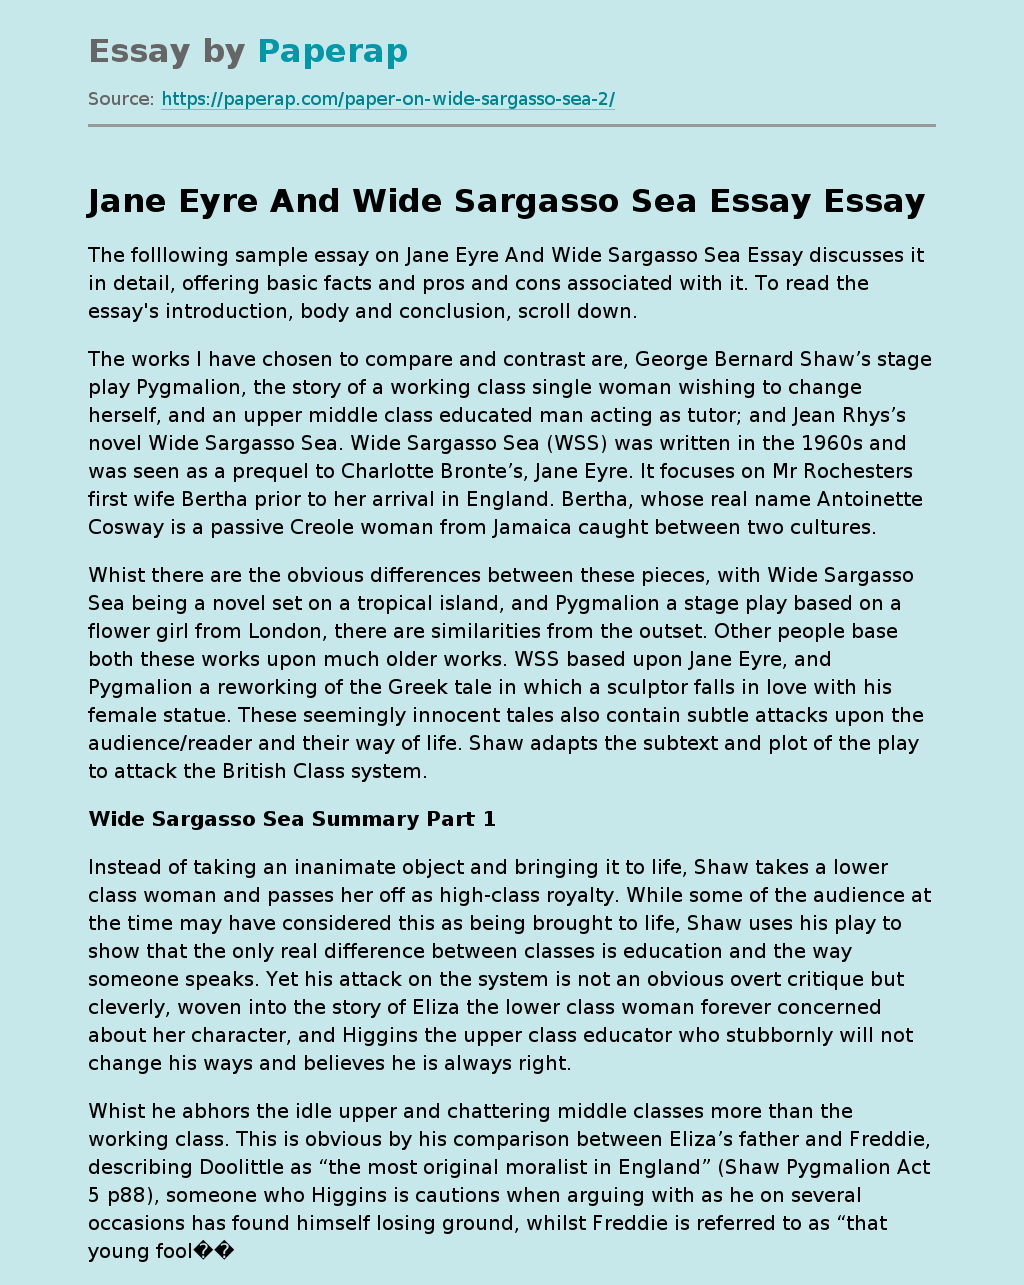 jane eyre and wide sargasso sea essay